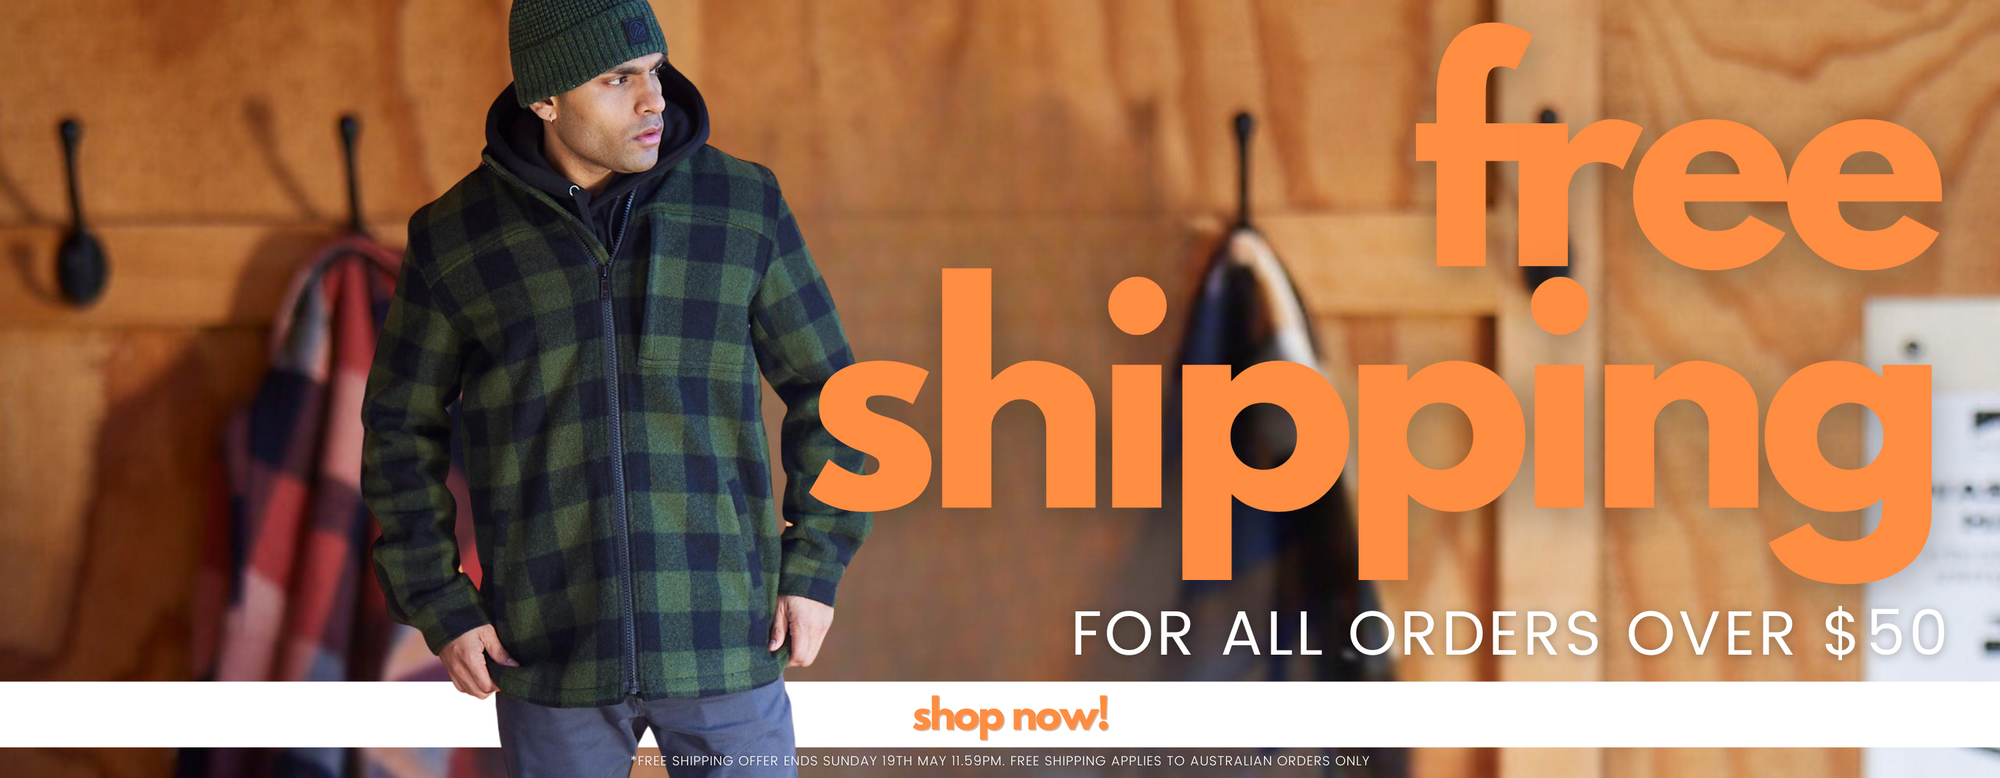 Free Shipping For All Orders $50. Shop Now!